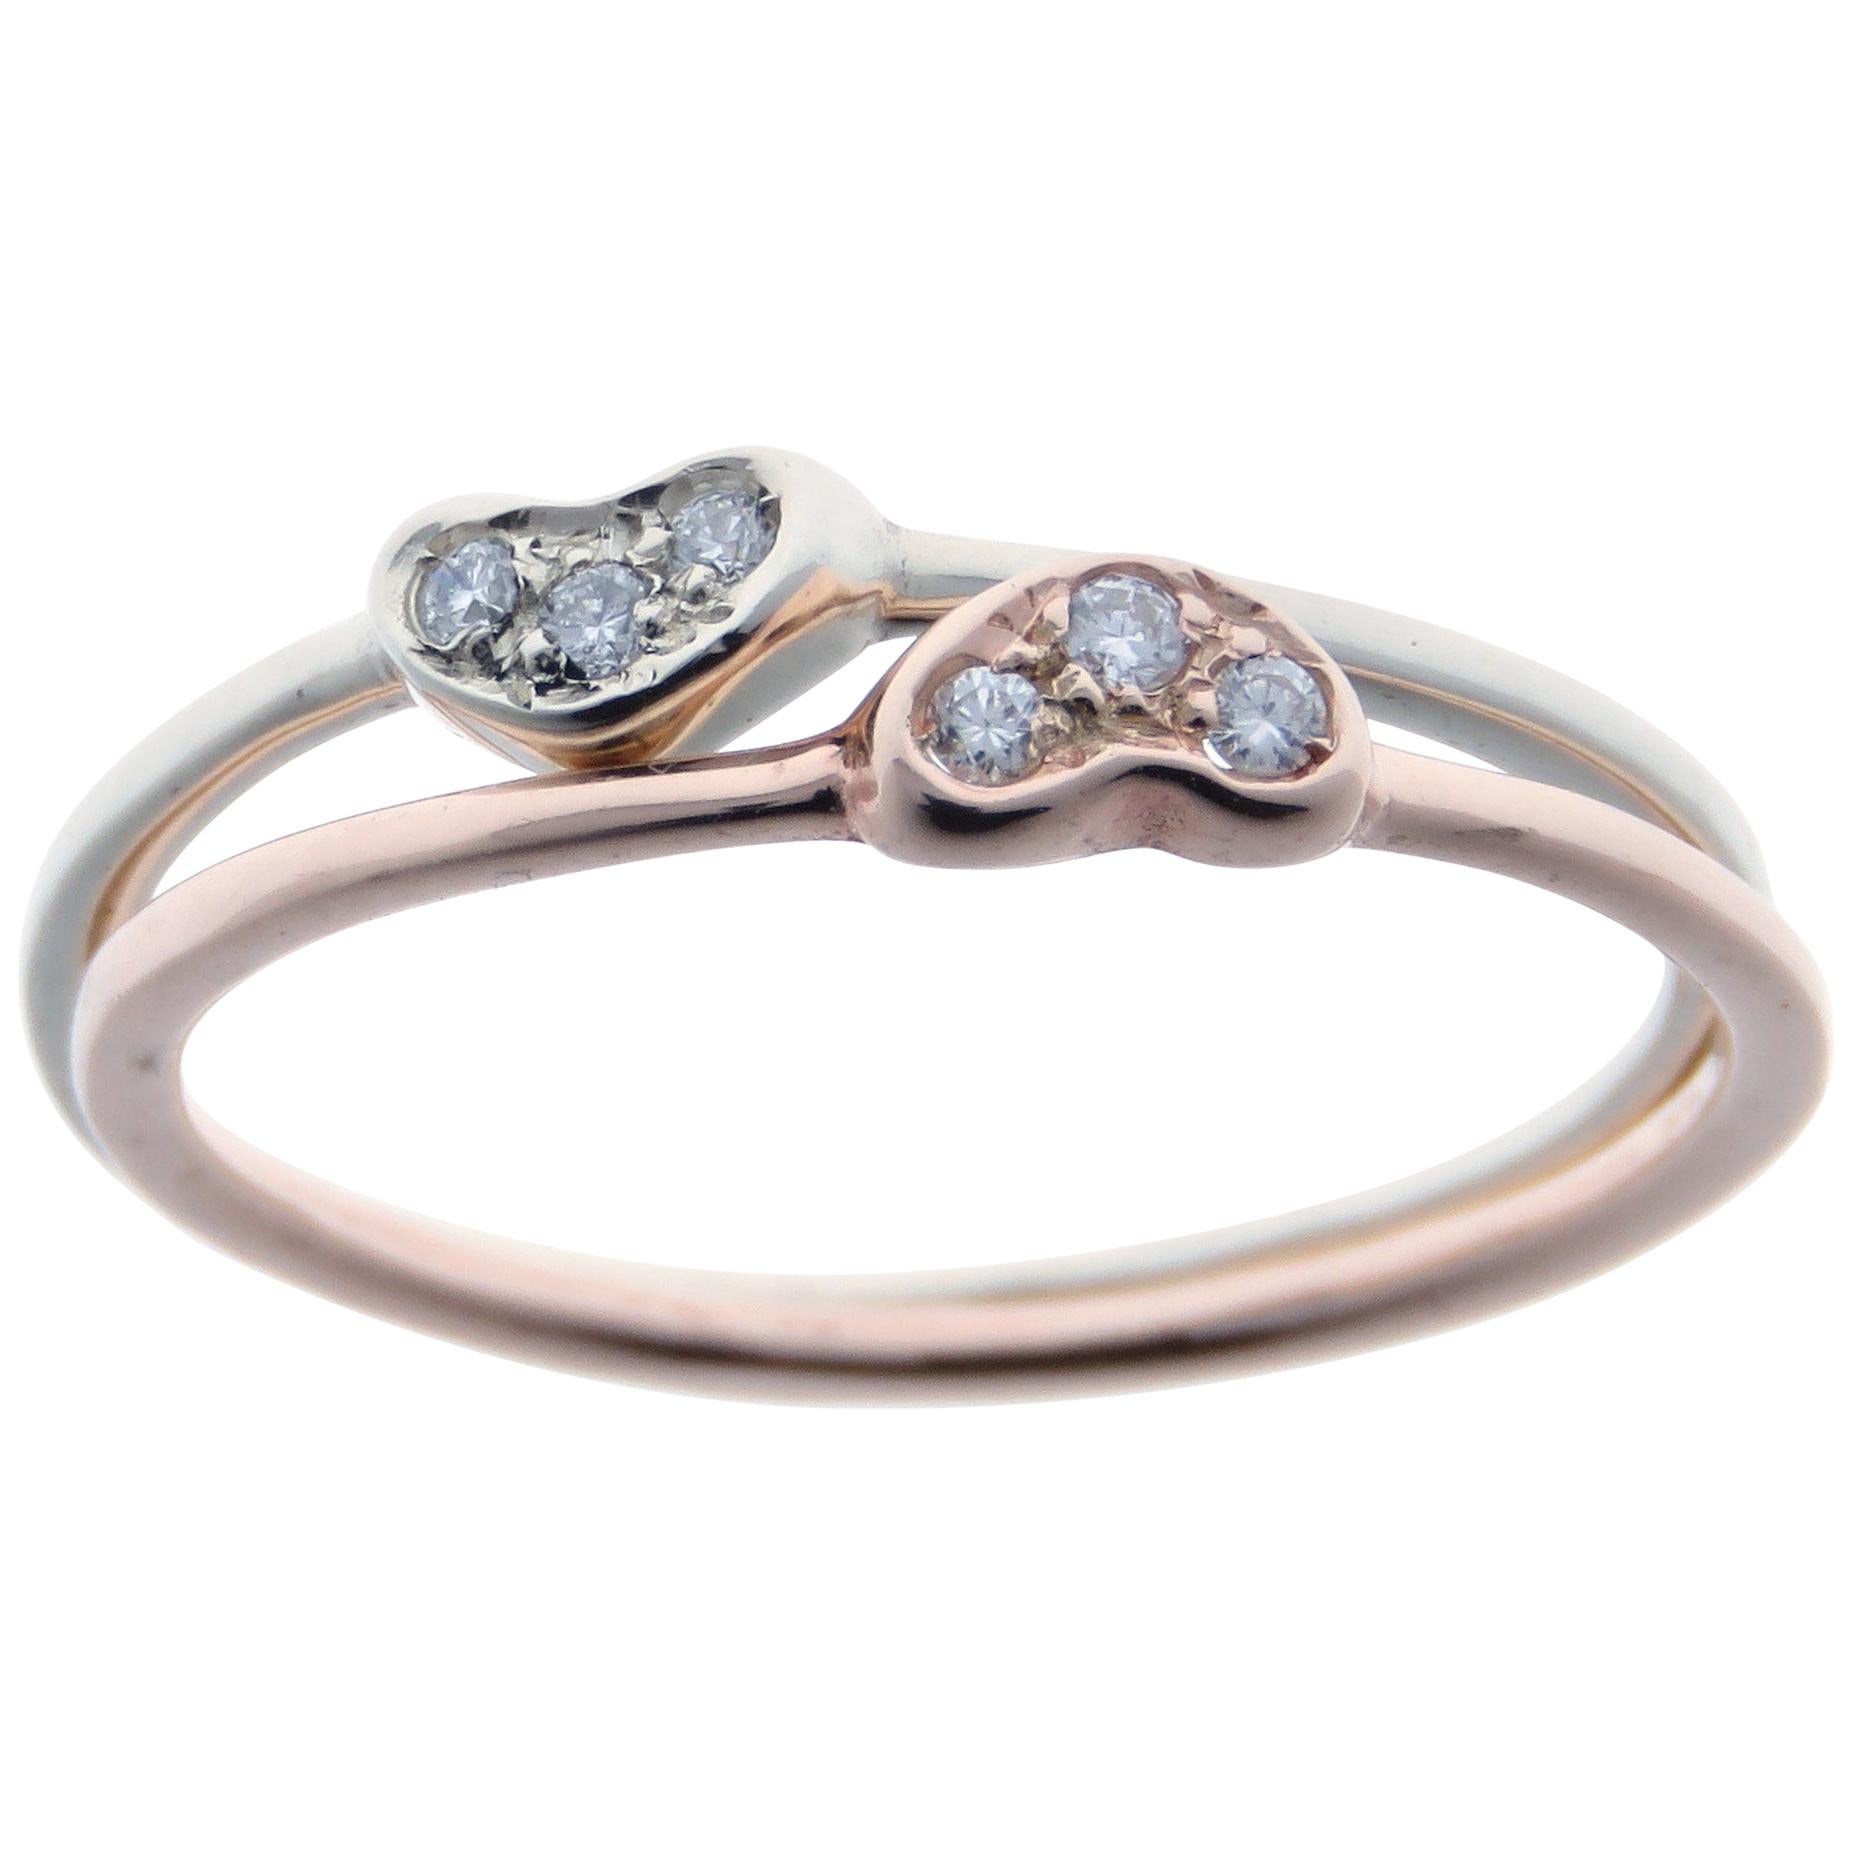 Diamonds White Rose Gold Stacking Ring Handcrafted in Italy by Botta Gioielli For Sale